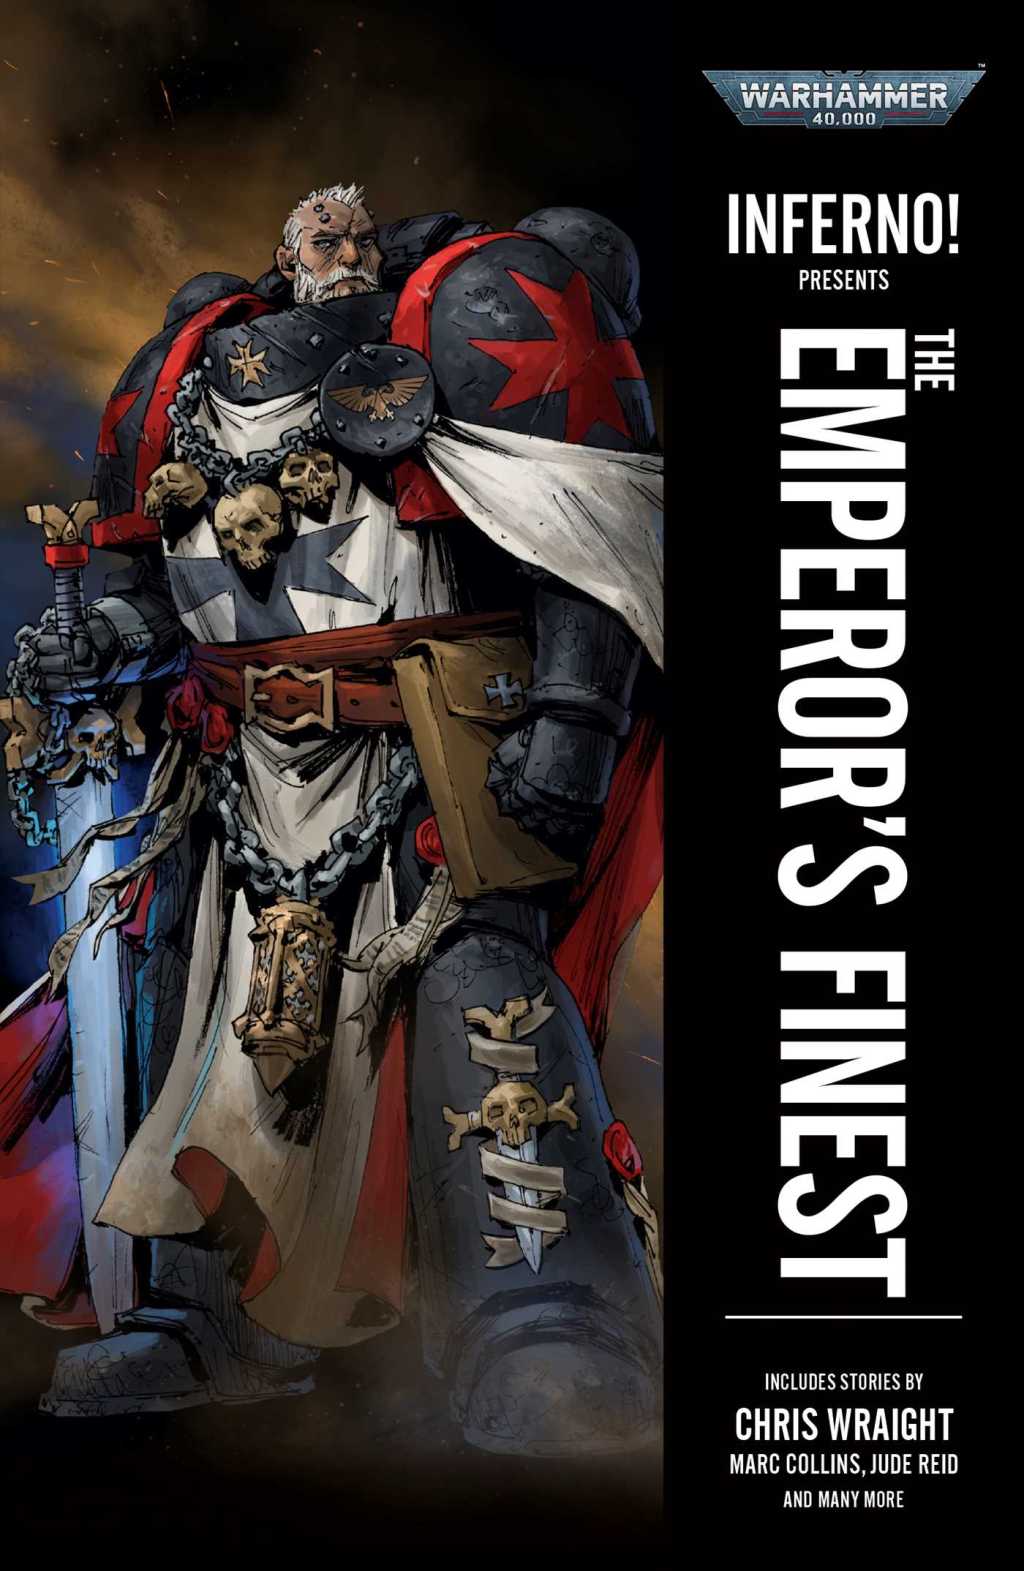 BOOK REVIEW: Inferno! Presents: The Emperor’s Finest